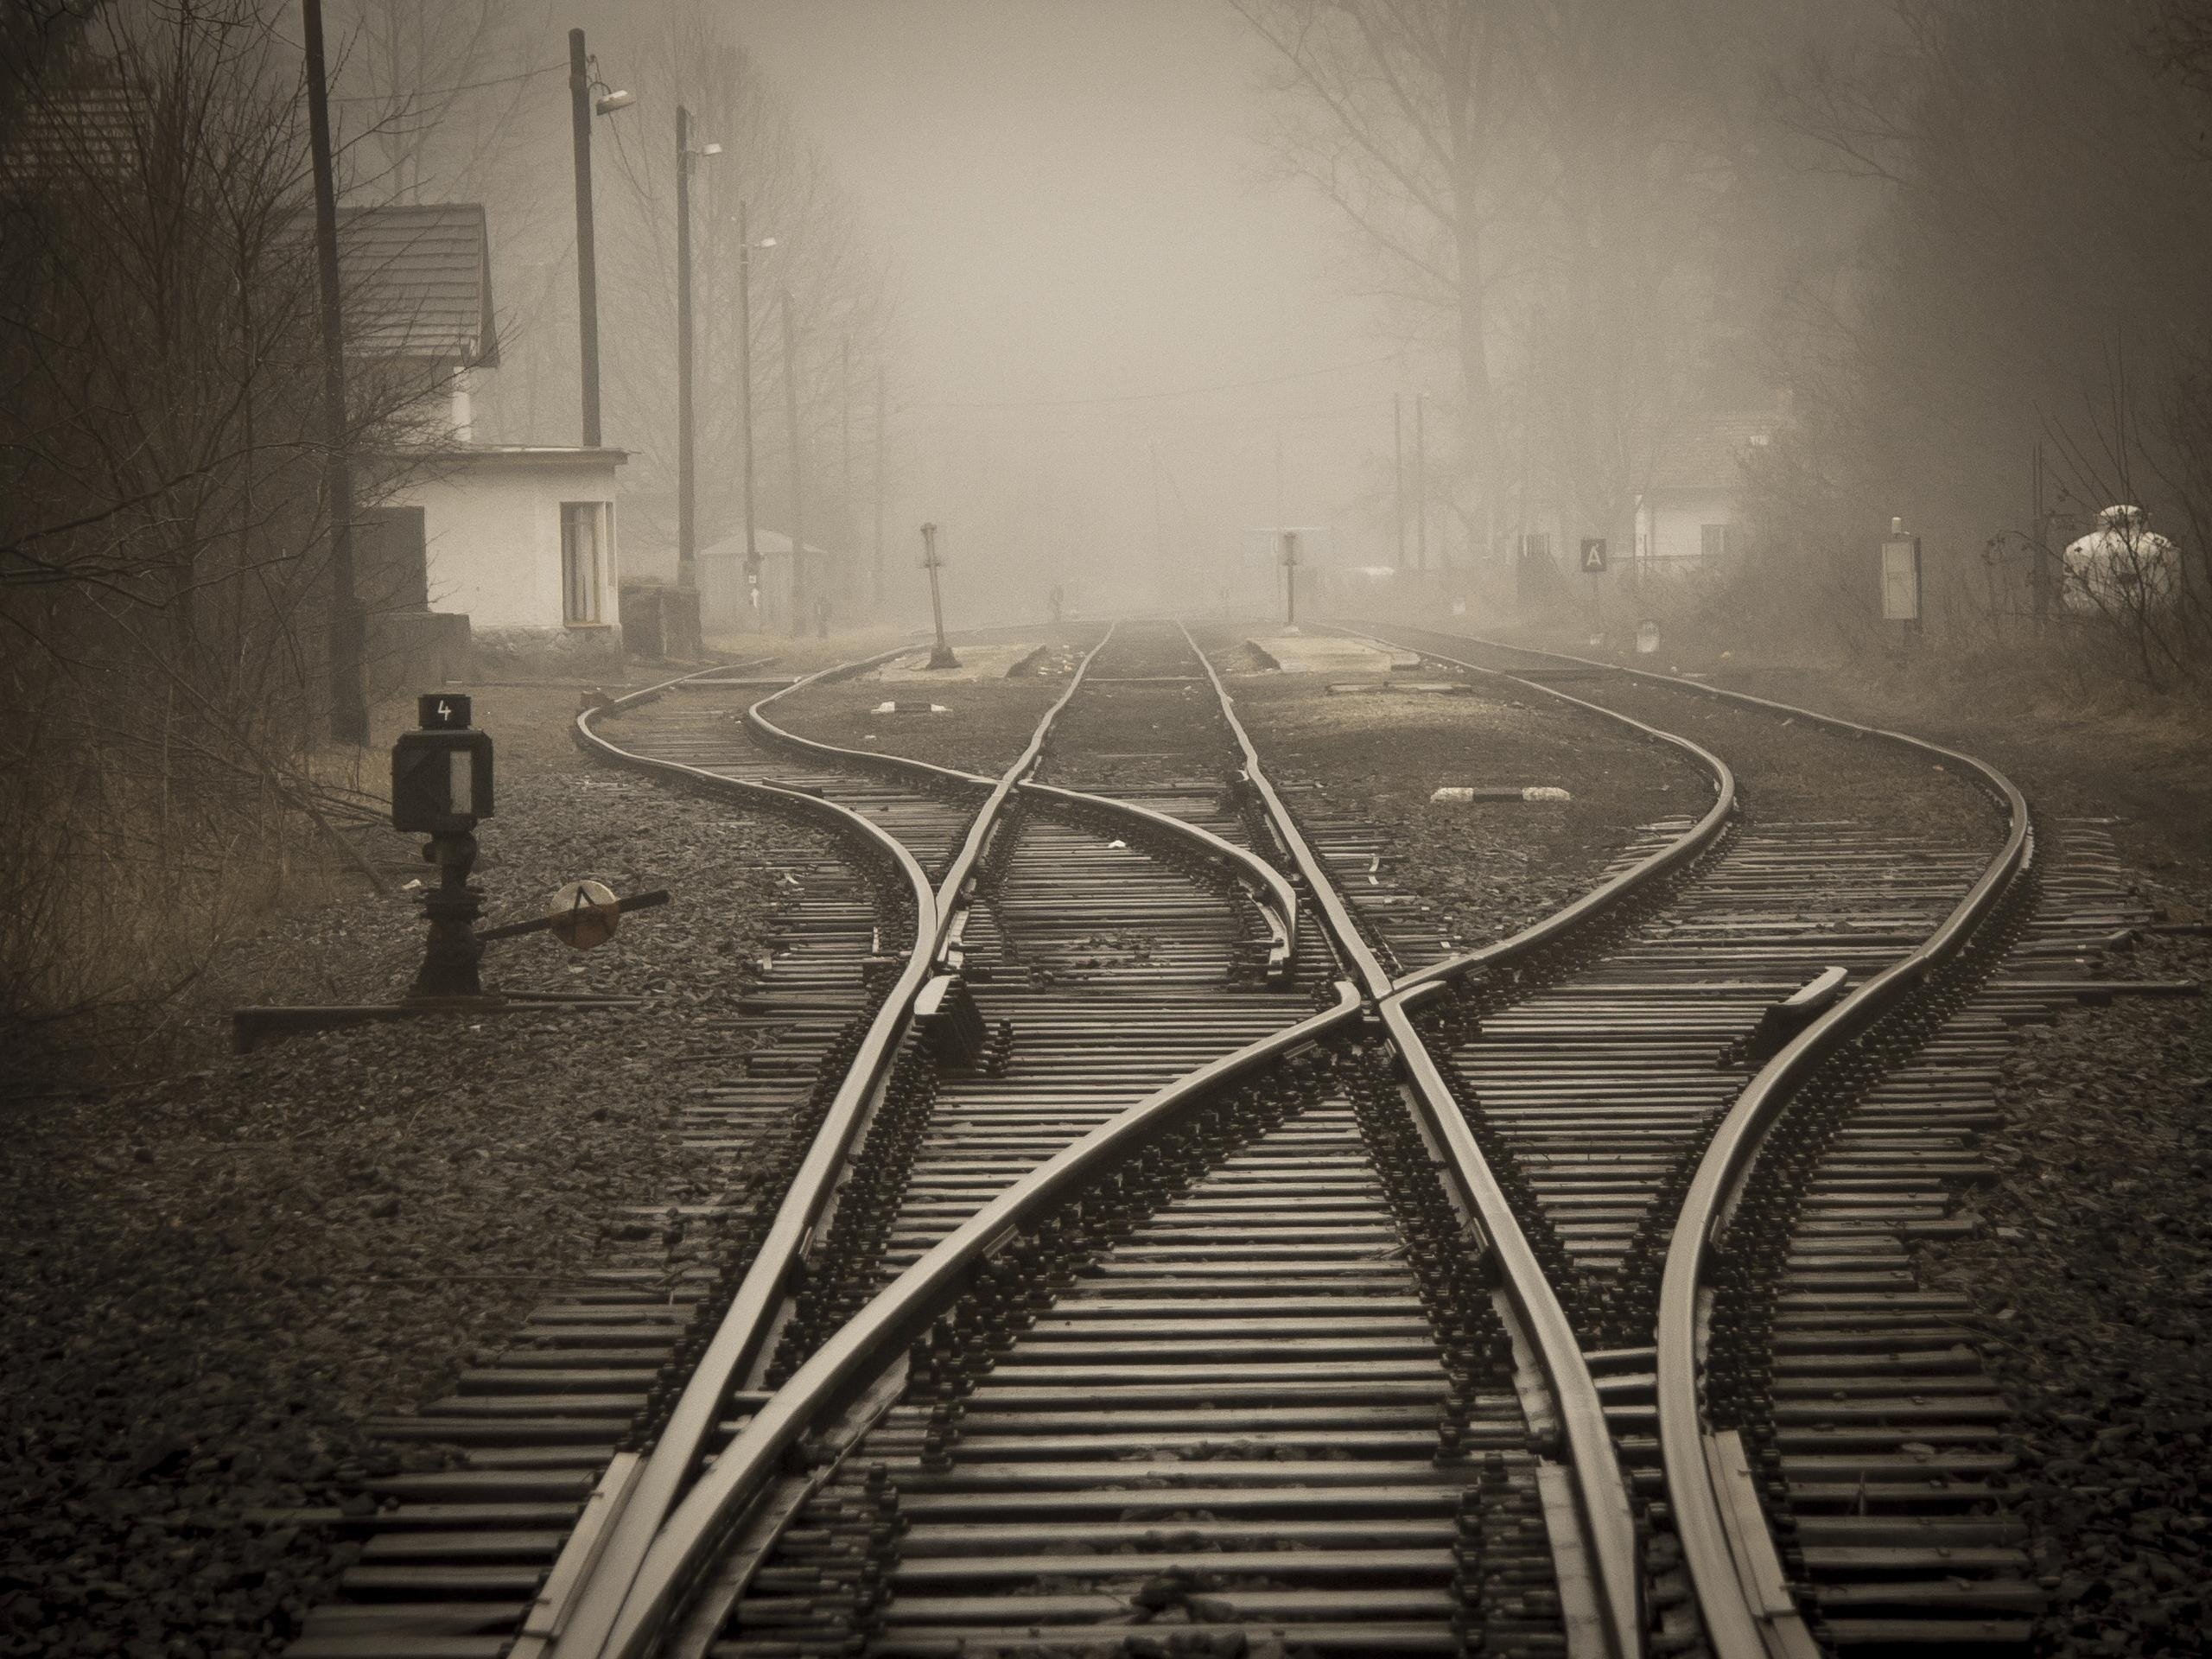 Pictured - An image of railroad tracks in a foggy city | Source: Pexels 